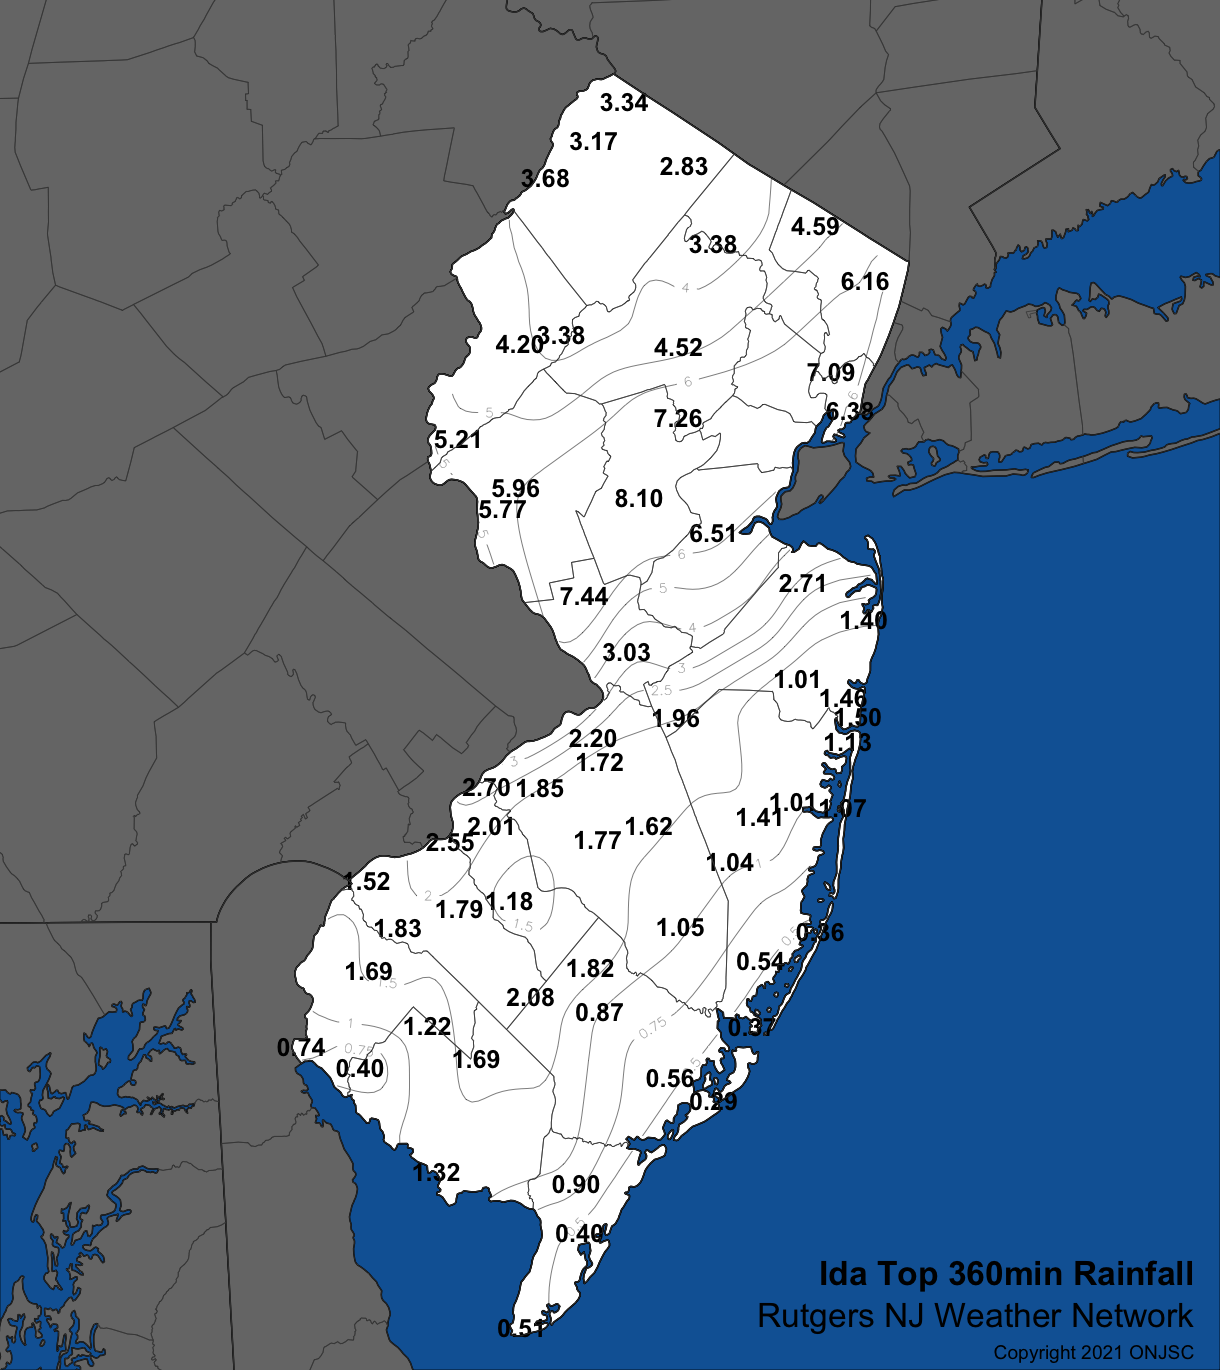 Peak six-hour rainfall across NJ based on observations from Rutgers NJ Weather Network stations and the Newark Airport NWS station. See the text for a further explanation of how values were calculated.